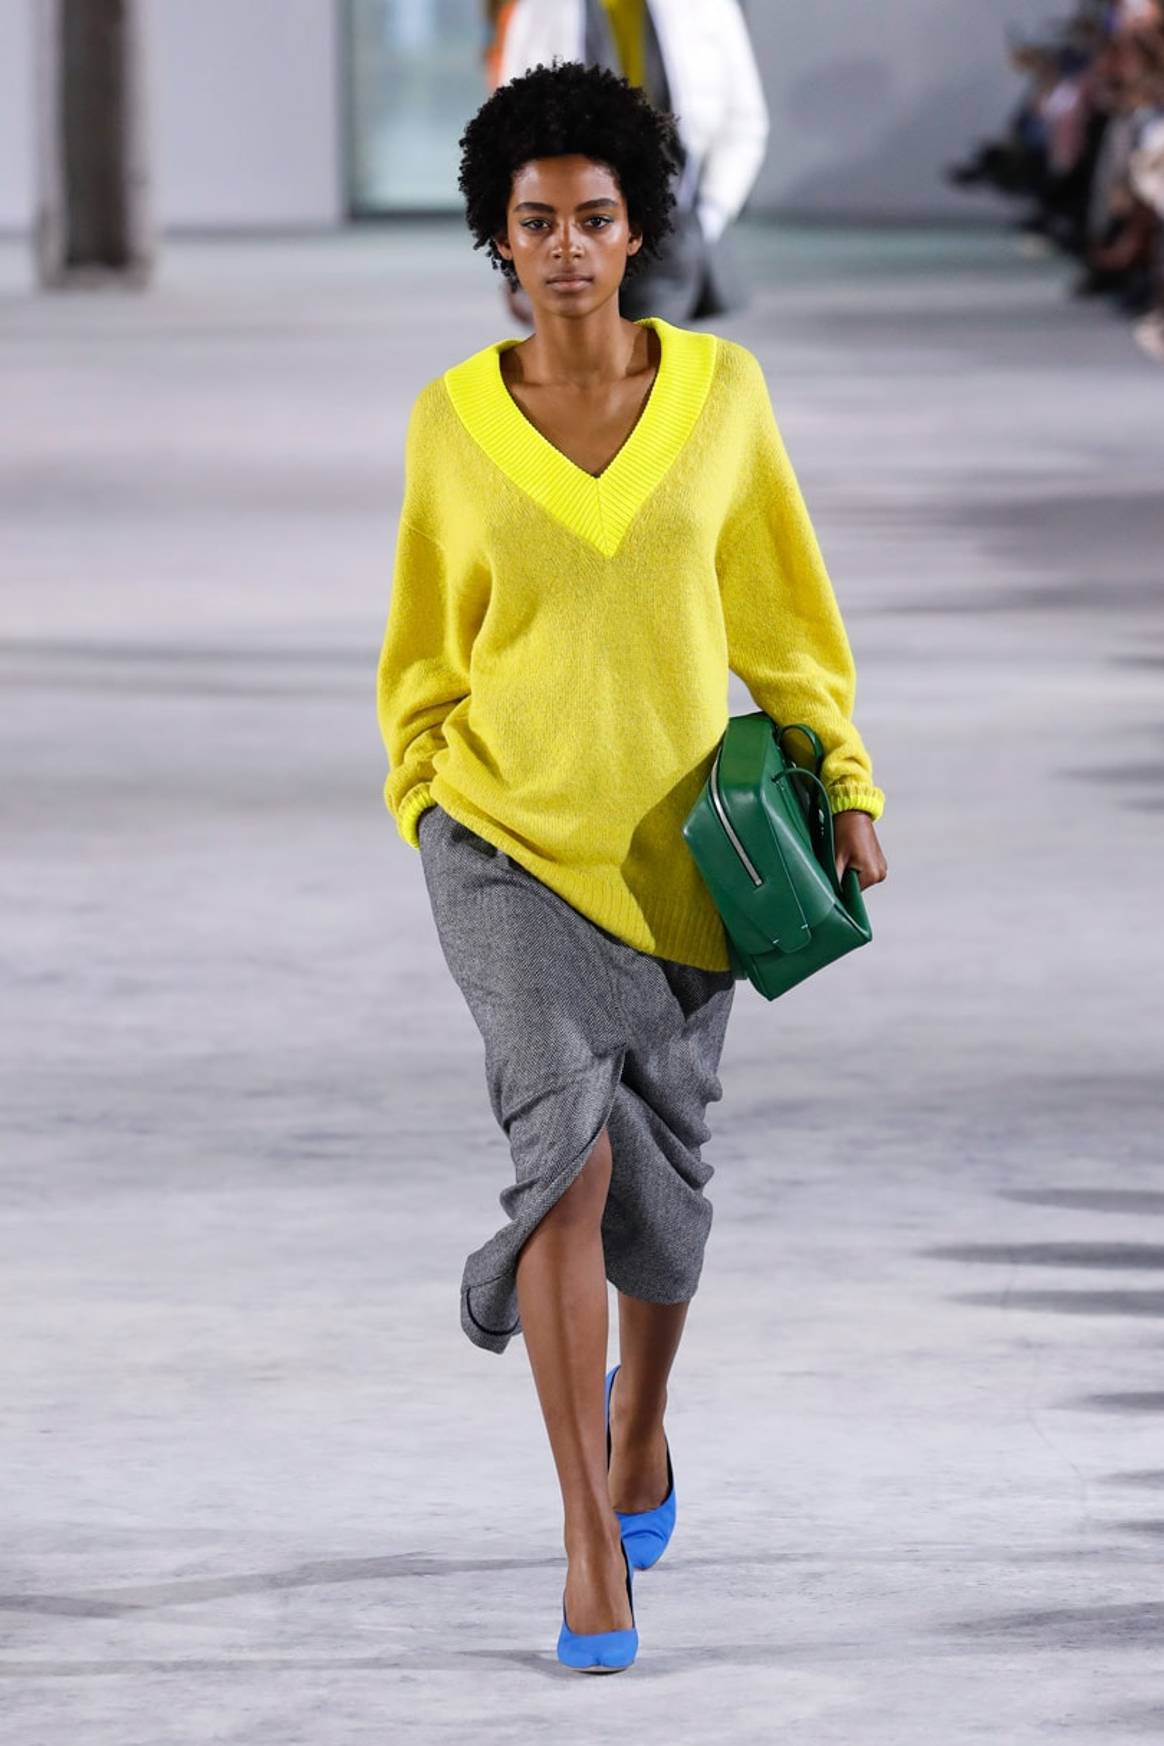 Tibi provides lessons in wearability at New York Fashion Week